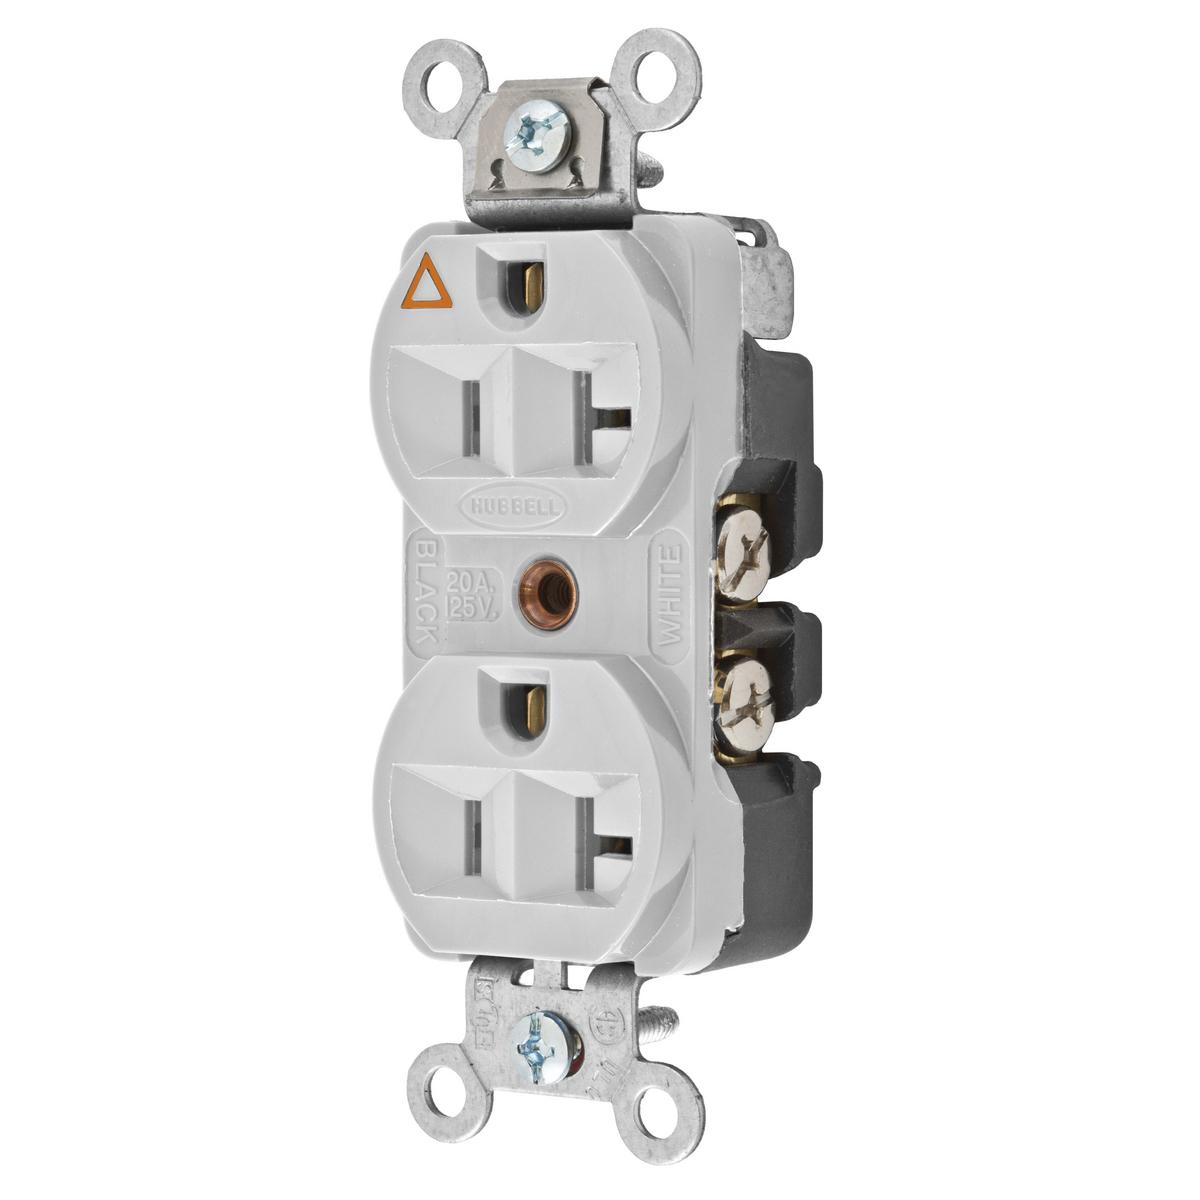 Hubbell CR5352IGOW Straight Blade Devices, Receptacles, Duplex, Hubbell-Pro Heavy Duty, 2-Pole 3-Wire Grounding, 20A 125V, 5-20R, Office White, Single Pack, Isolated Ground.  ; Triangle marking on face indicates isolated ground ; Slender/compact design ; Finder Groove Face 